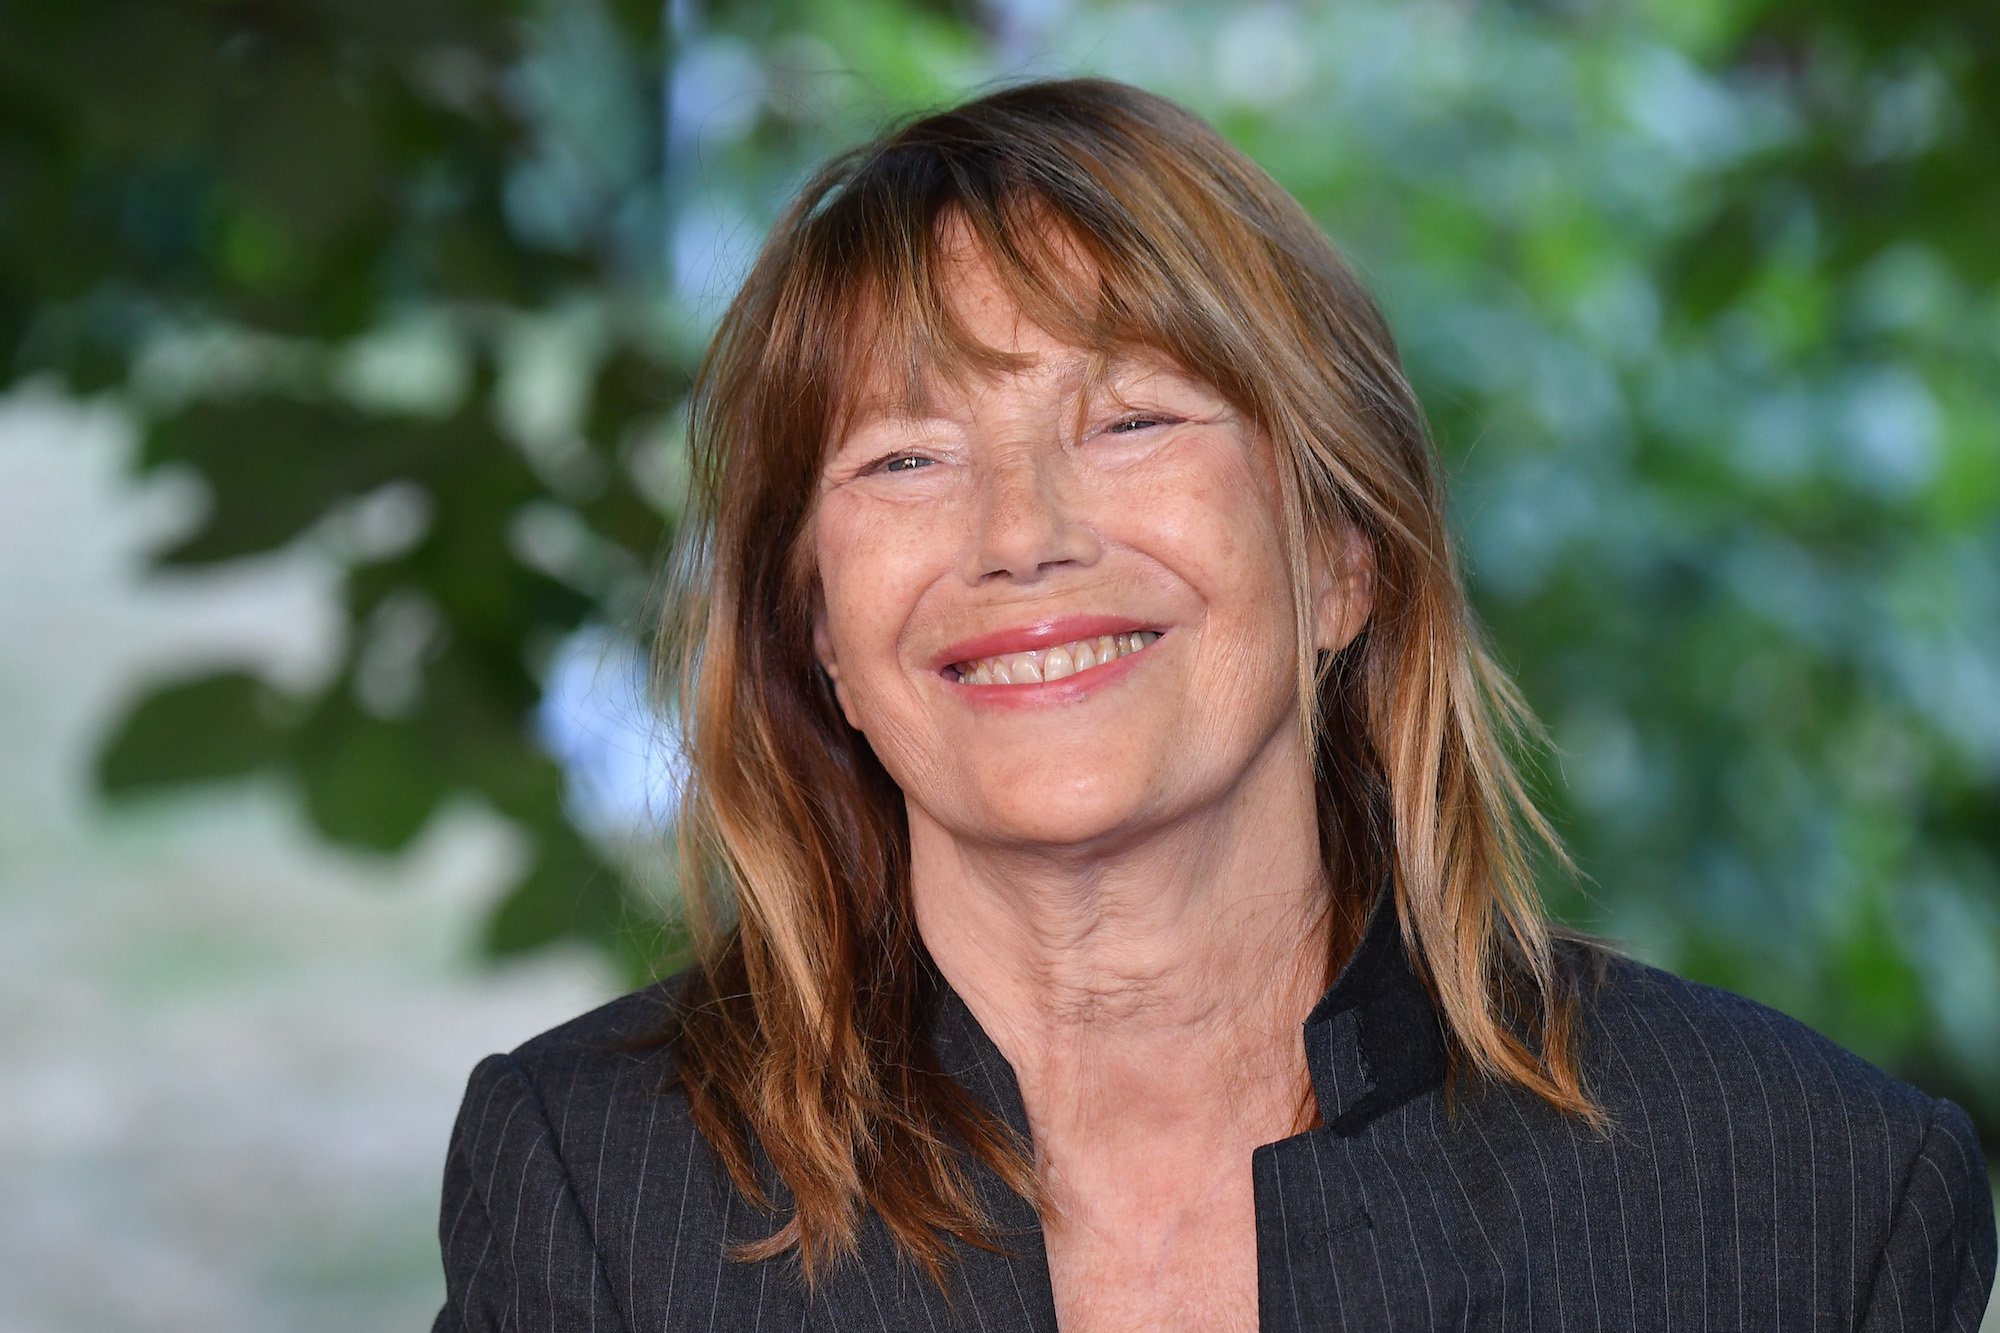 Jane Birkin attends "Jane by Charlotte" Photocall during the 14th Angouleme French-Speaking Film Festival - Day Four on August 27, 2021 in Angouleme, France.